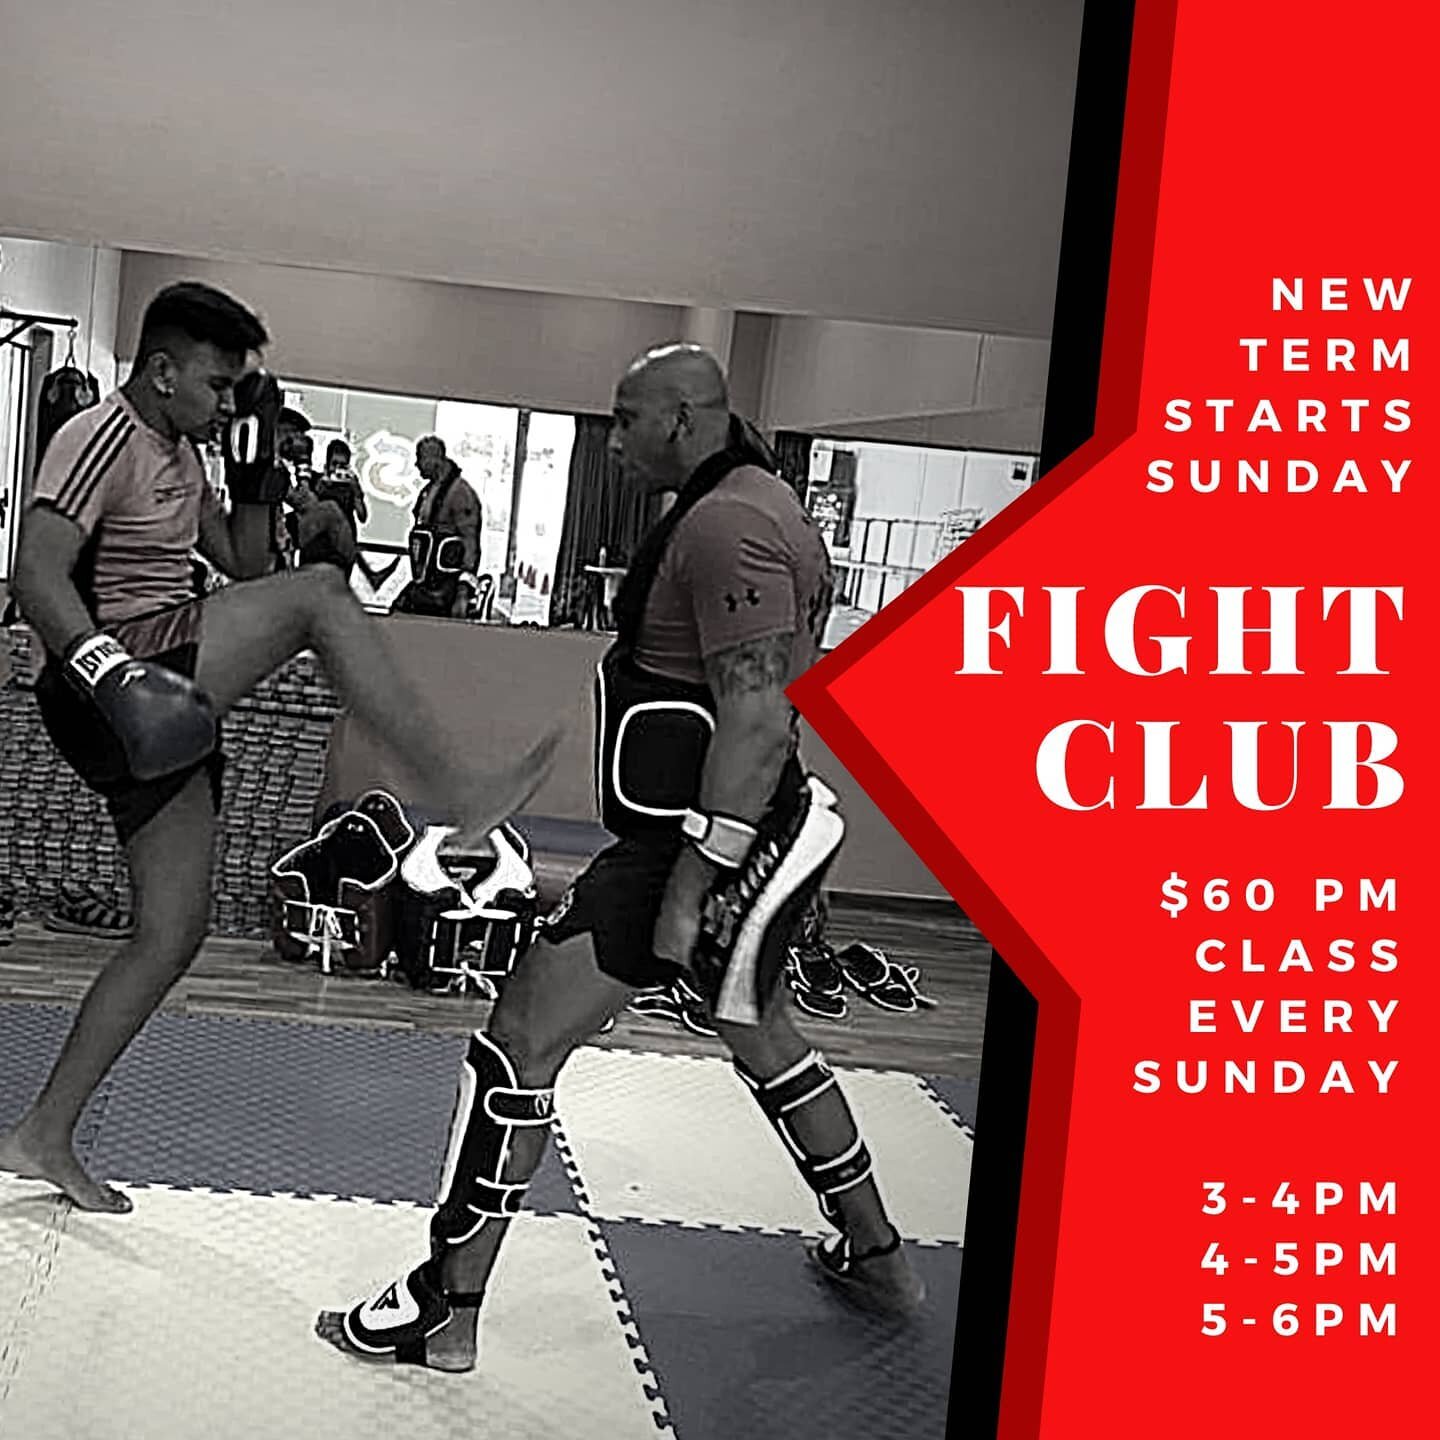 Are you ready to be your best self? Class every Sunday. DM for info 📩
.
.
.
#cobrafightgym #singapore #getmotivated #fitfam #weightloss #buildmuscle #getfit #fitness #boxing #boxingcoach #muaythai #kickboxing #boxingdrills #singaporeinsiders #fightc